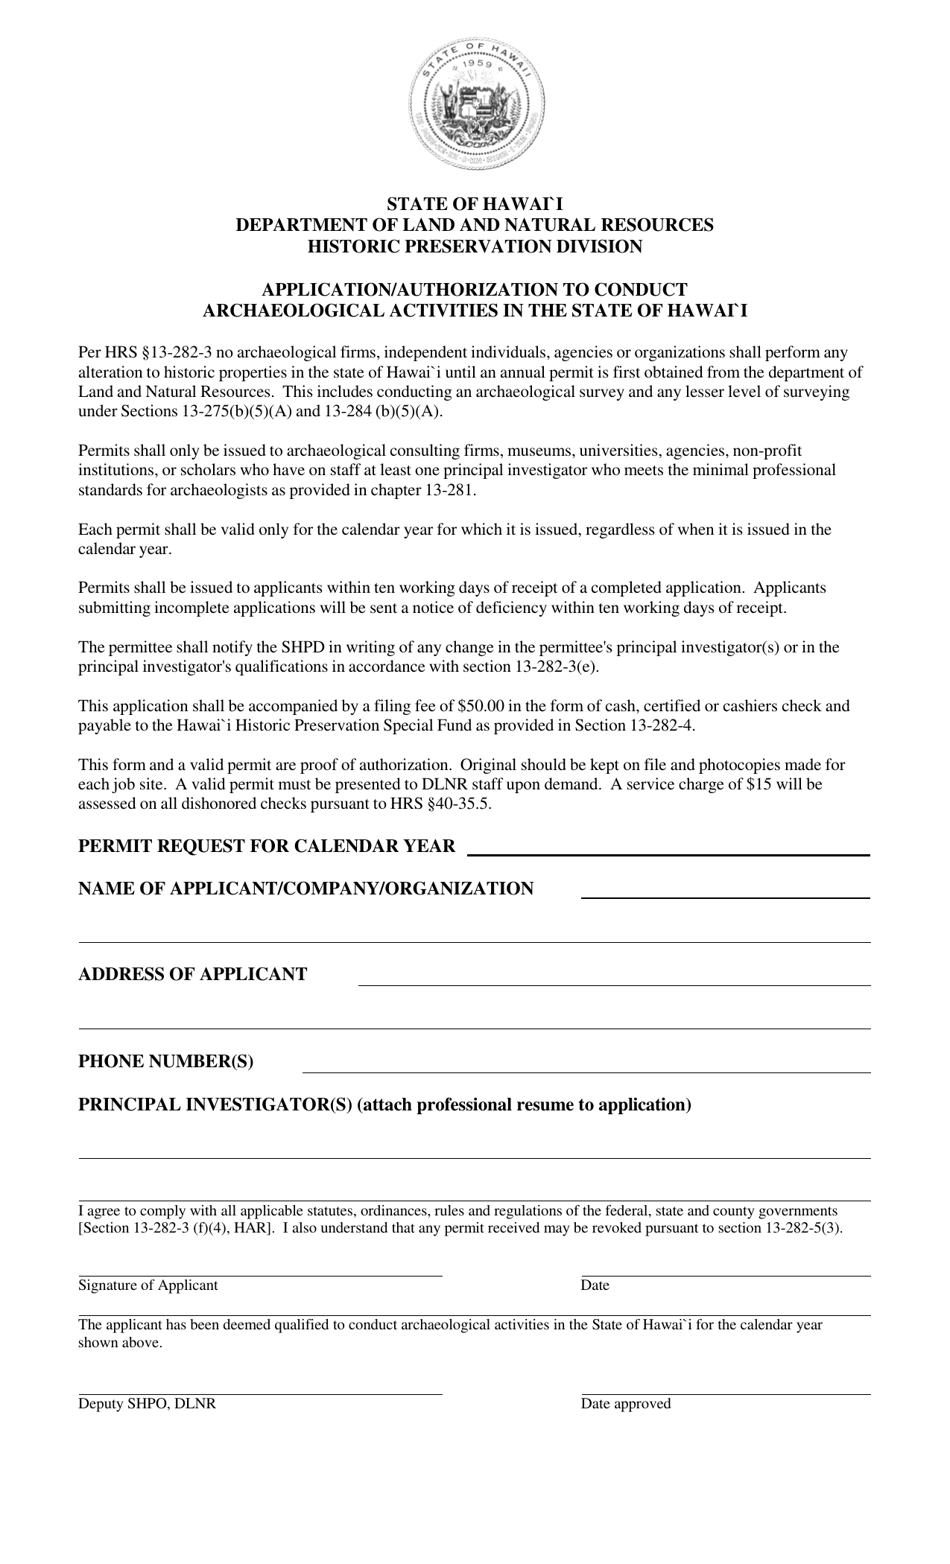 Application / Authorization to Conduct Archaeological Activities in the State of Hawaii - Hawaii, Page 1